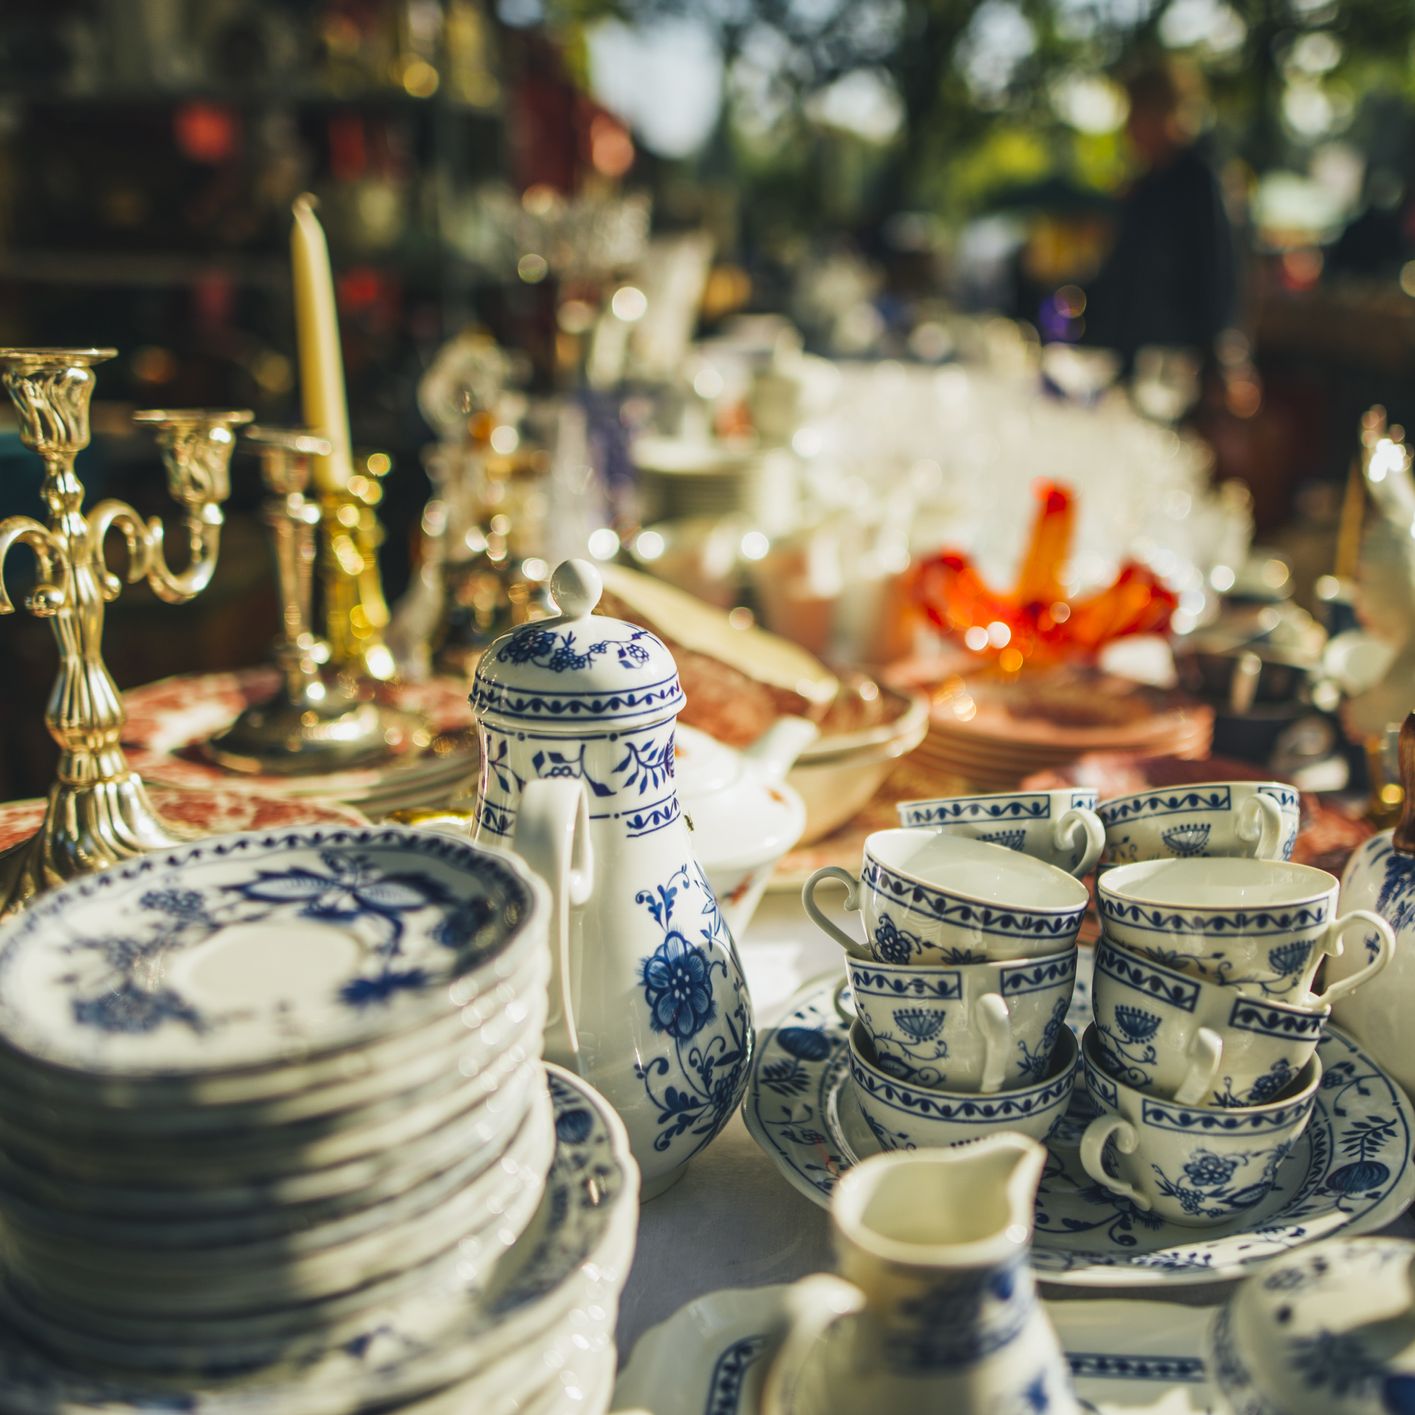 The 7 Items You Should Always Buy at Flea Markets, According to Designers